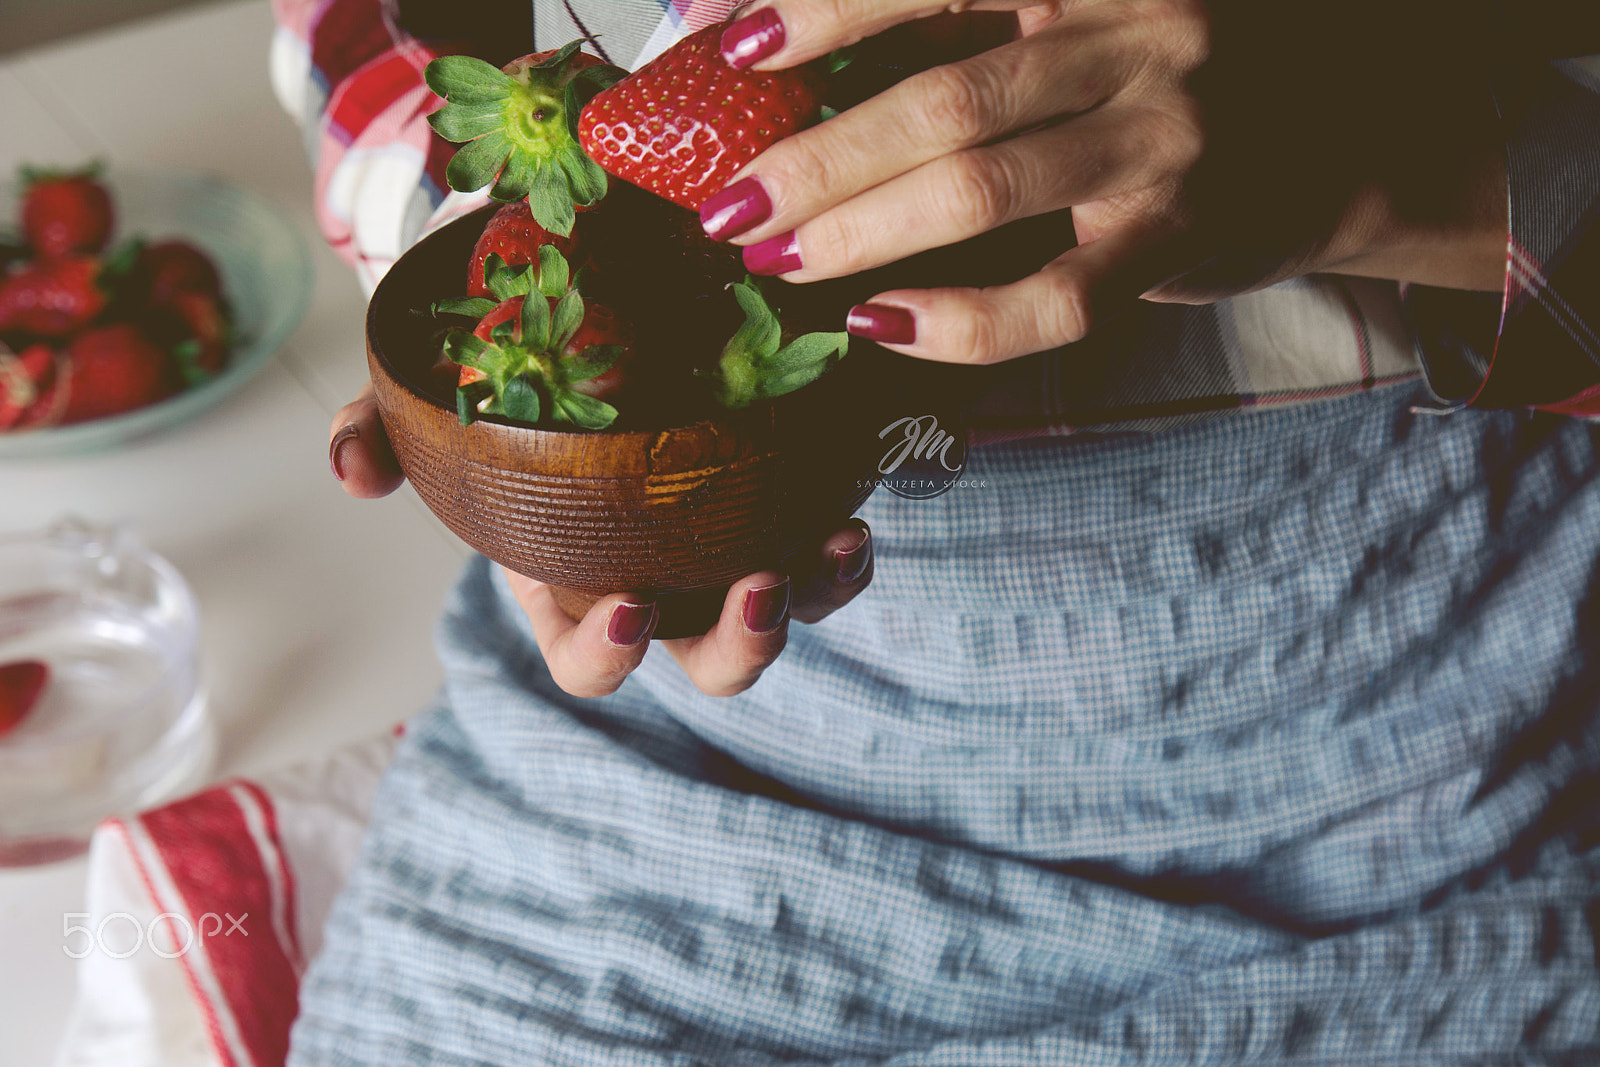 Nikon D7100 sample photo. Woman sitting with bowl of strawberries in hand. photography